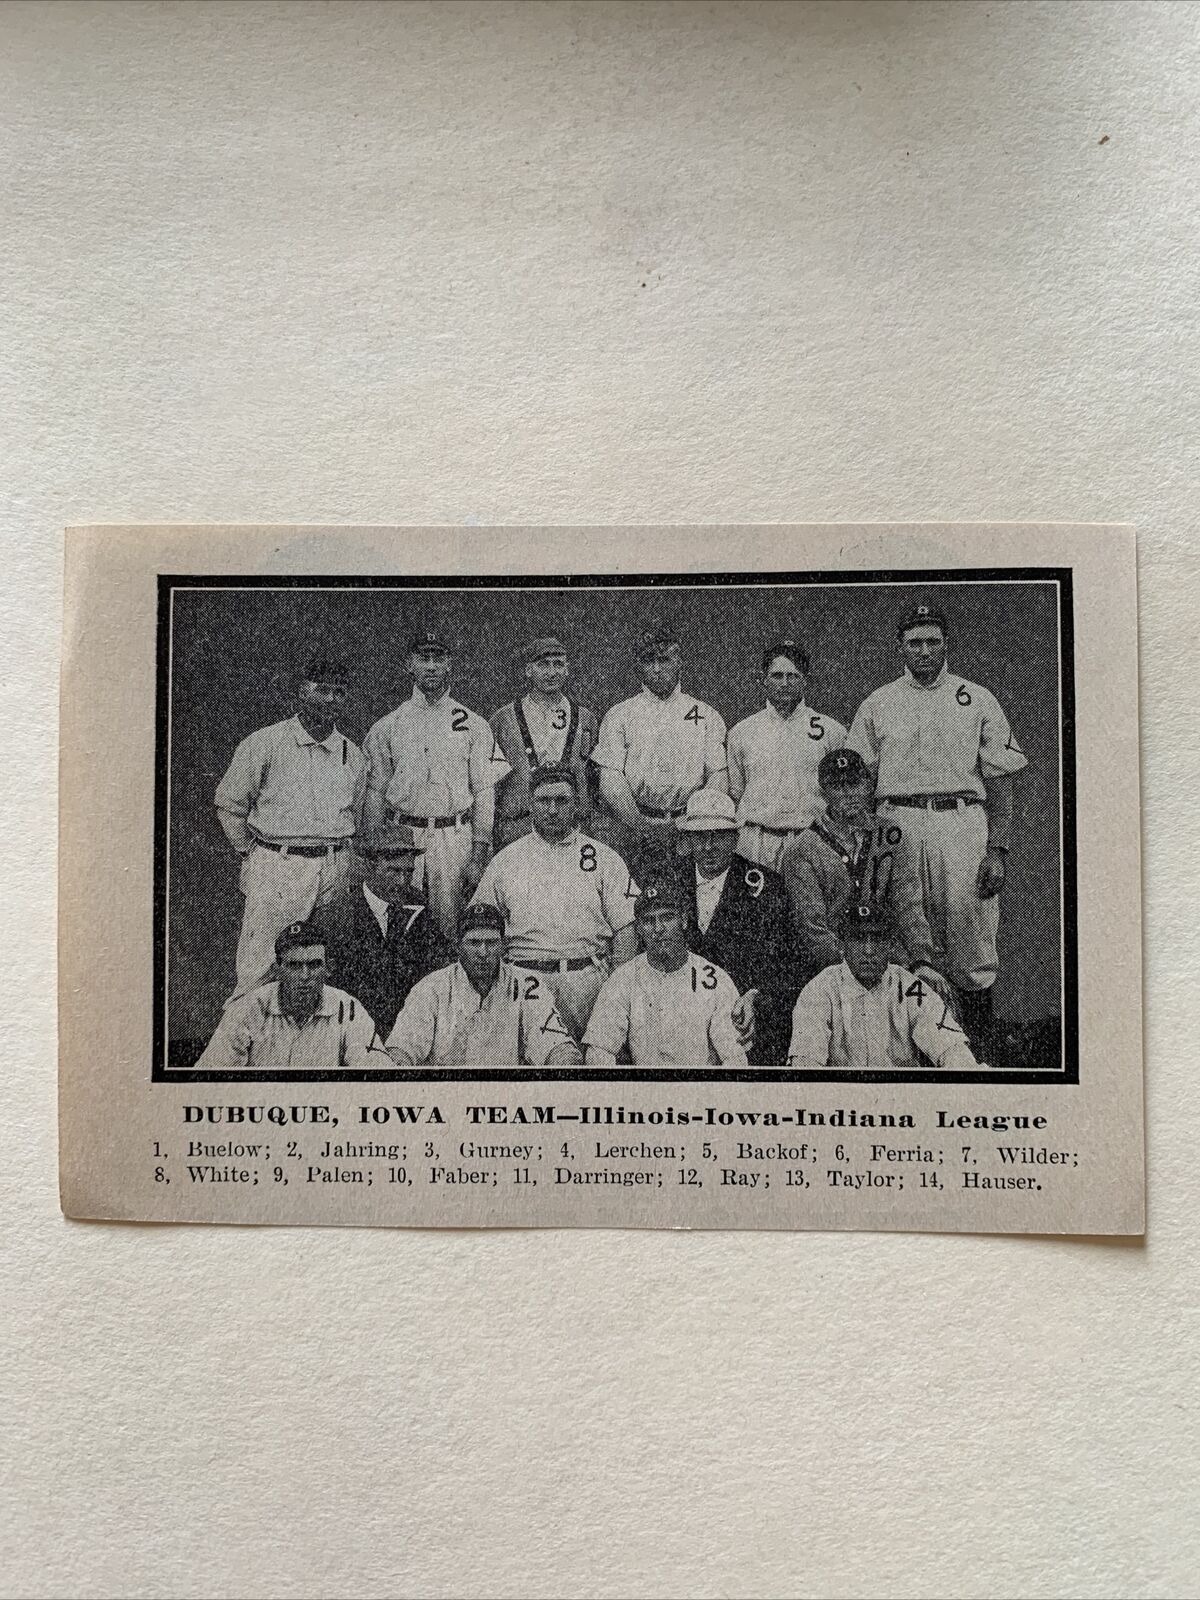 Dubuque Dubs Iowa Red Faber Arnold Hauser C. Buelow 1909 Baseball Team Picture